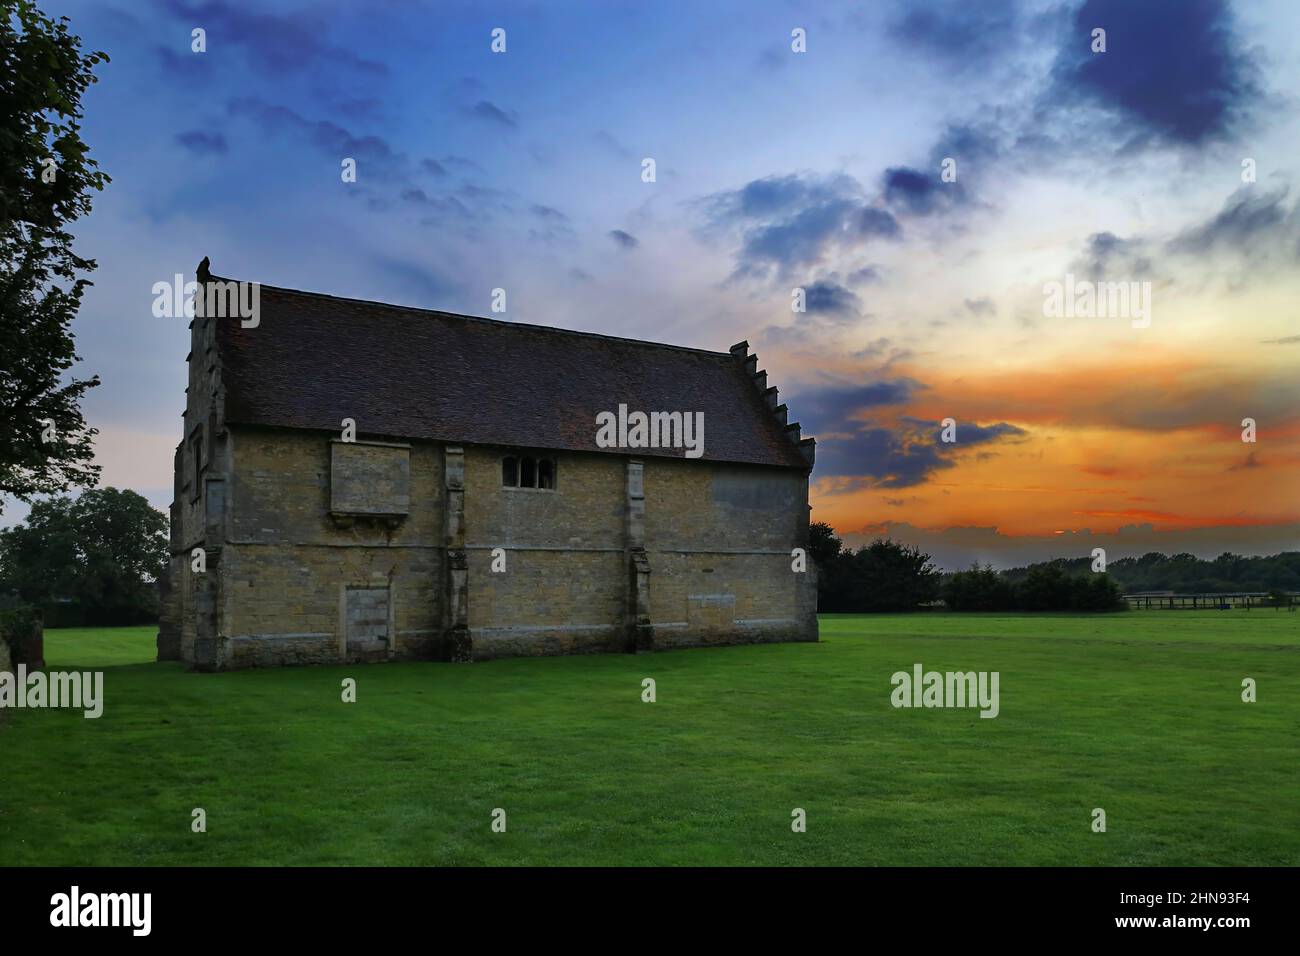 The Stables at sunset, Willington, Bedfordshire, England, UK Stock Photo